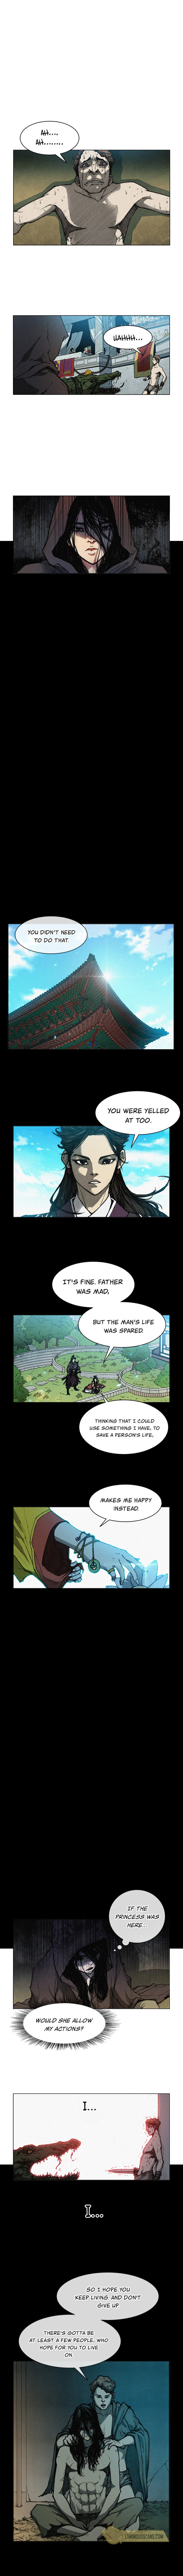 Long Way of the Warrior Chapter 5 - Page 10